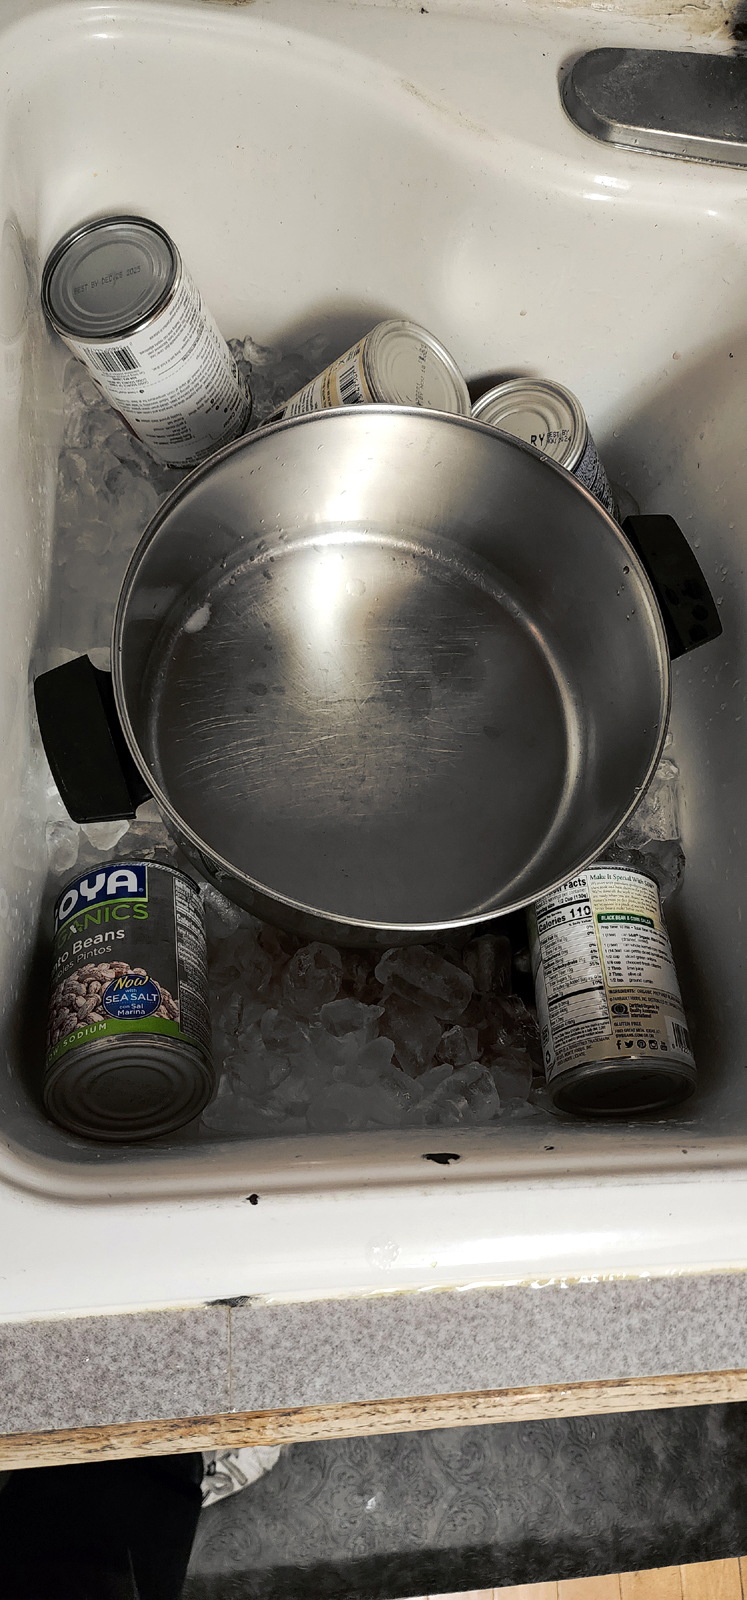 Cans of beans draining into ice at the bottom of a sink